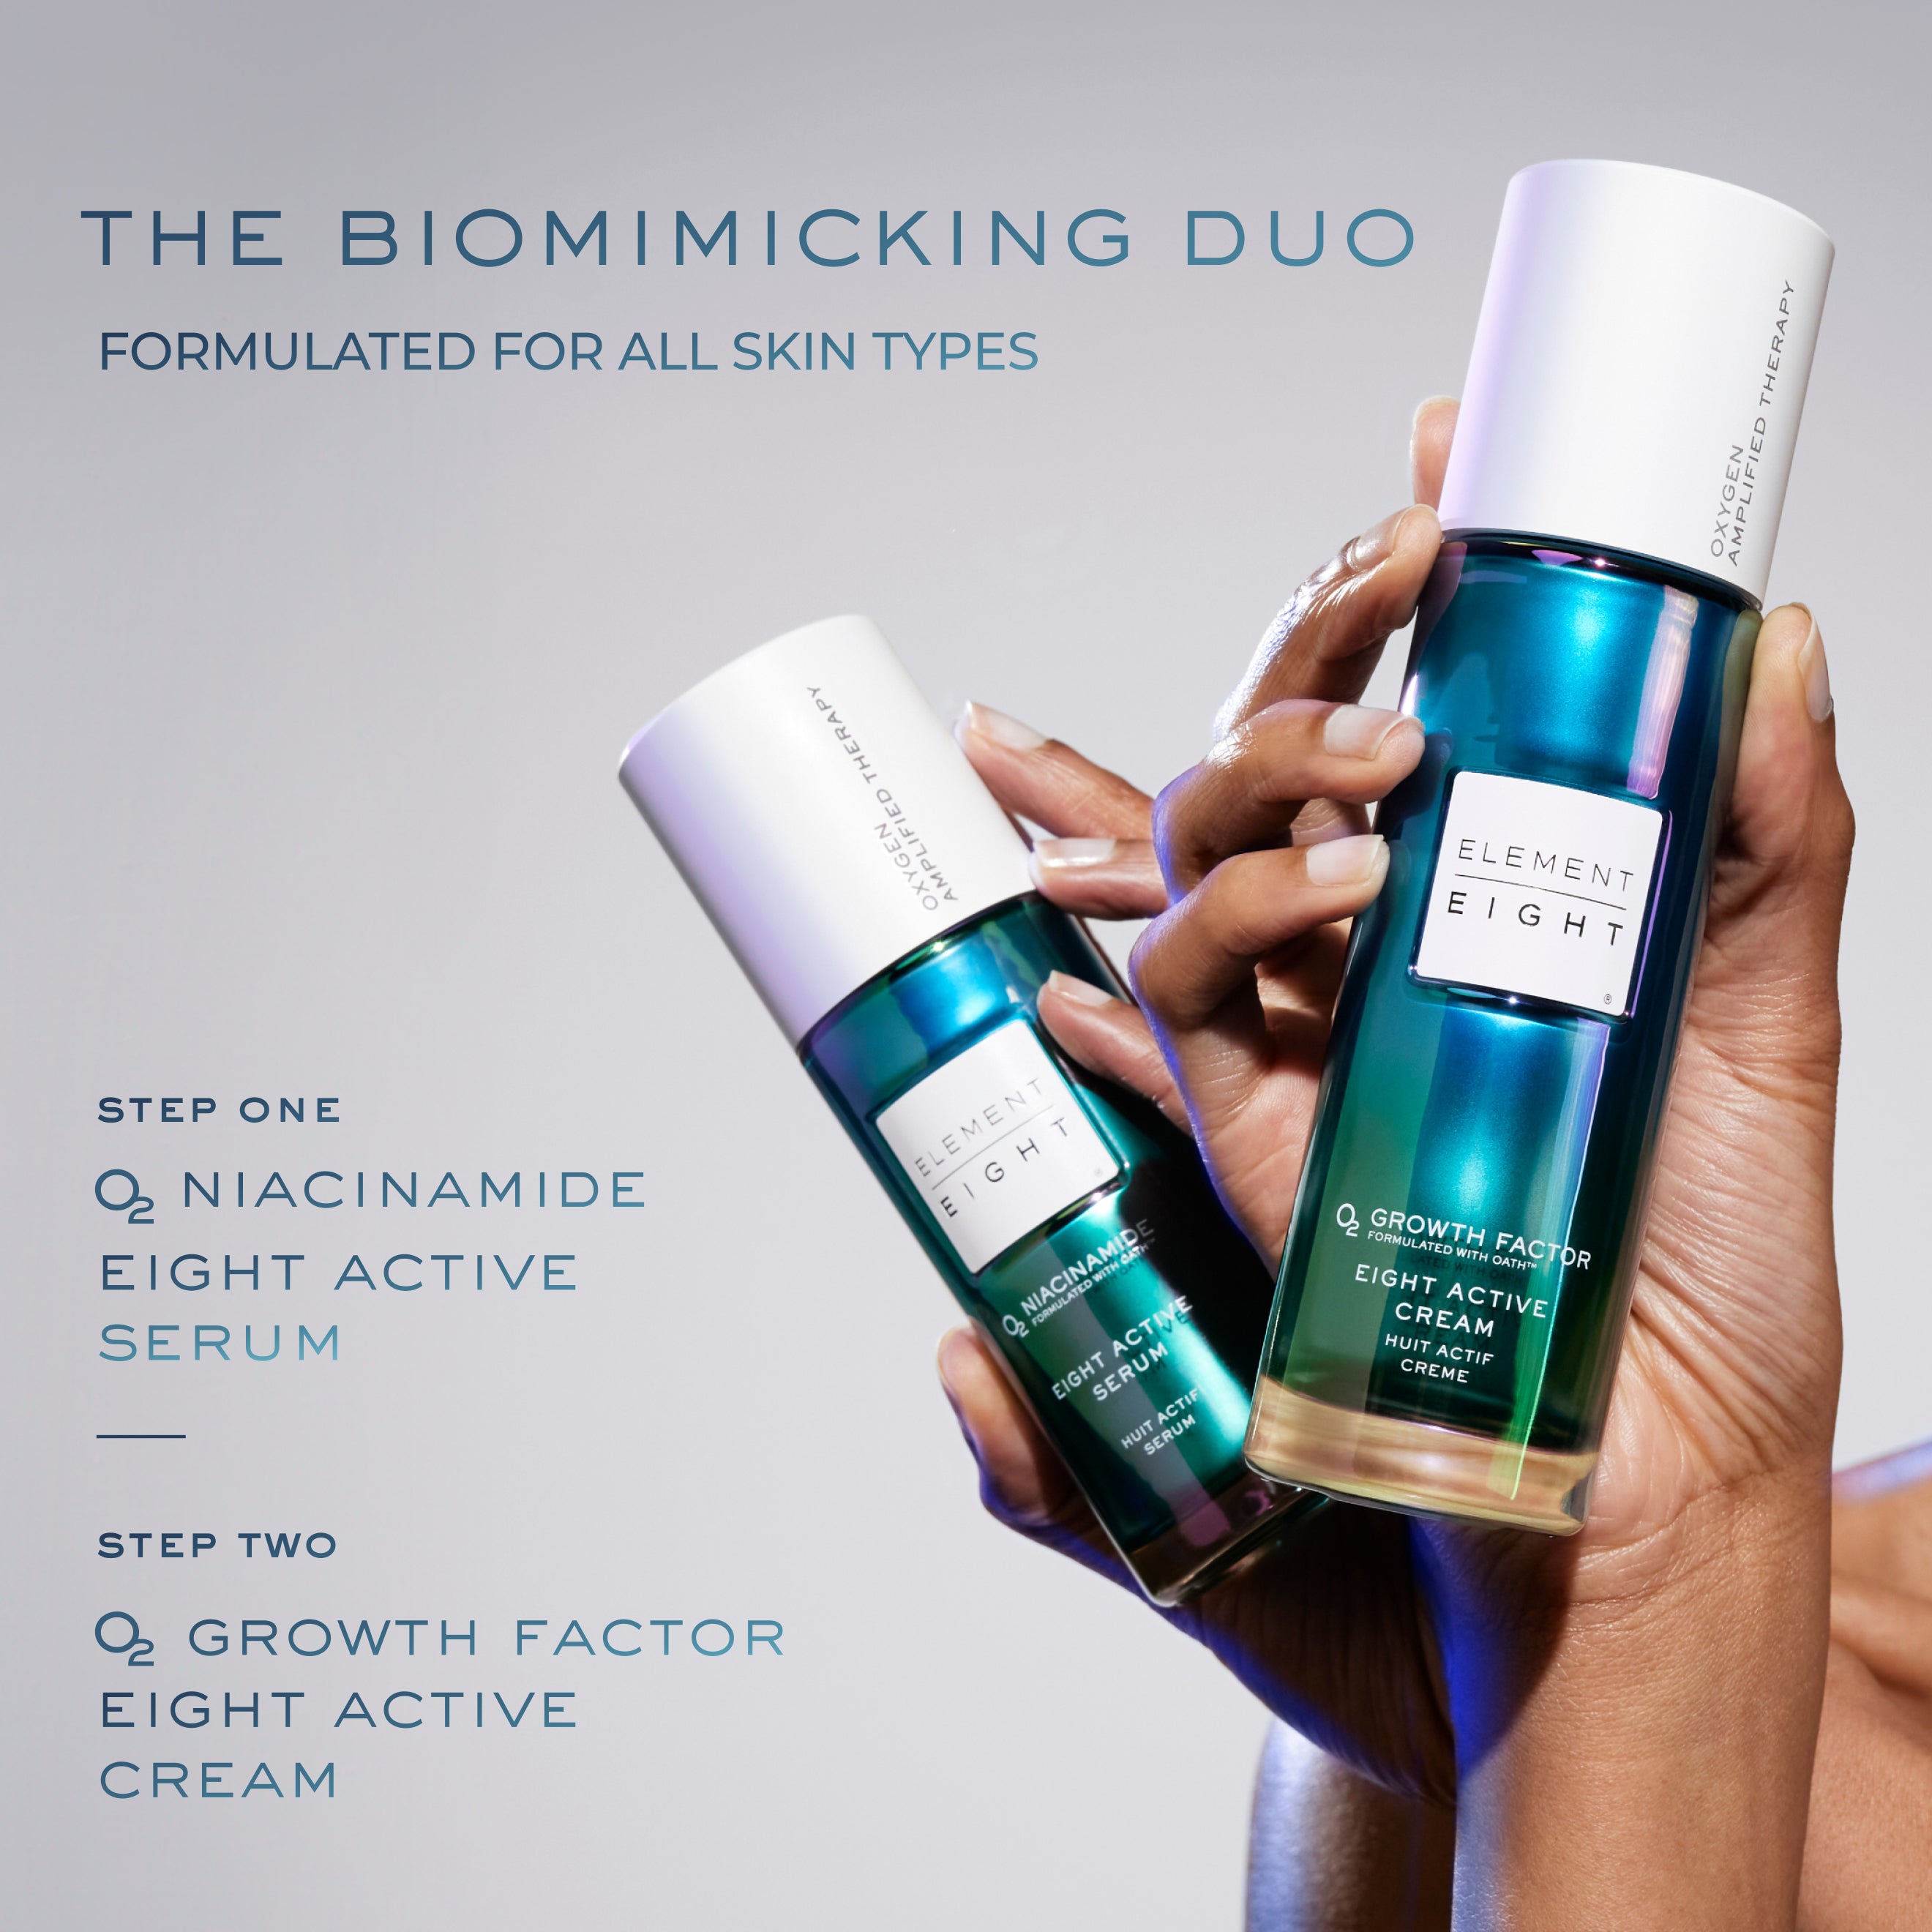 O2 EIGHT ACTIVE DISCOVERY DUO